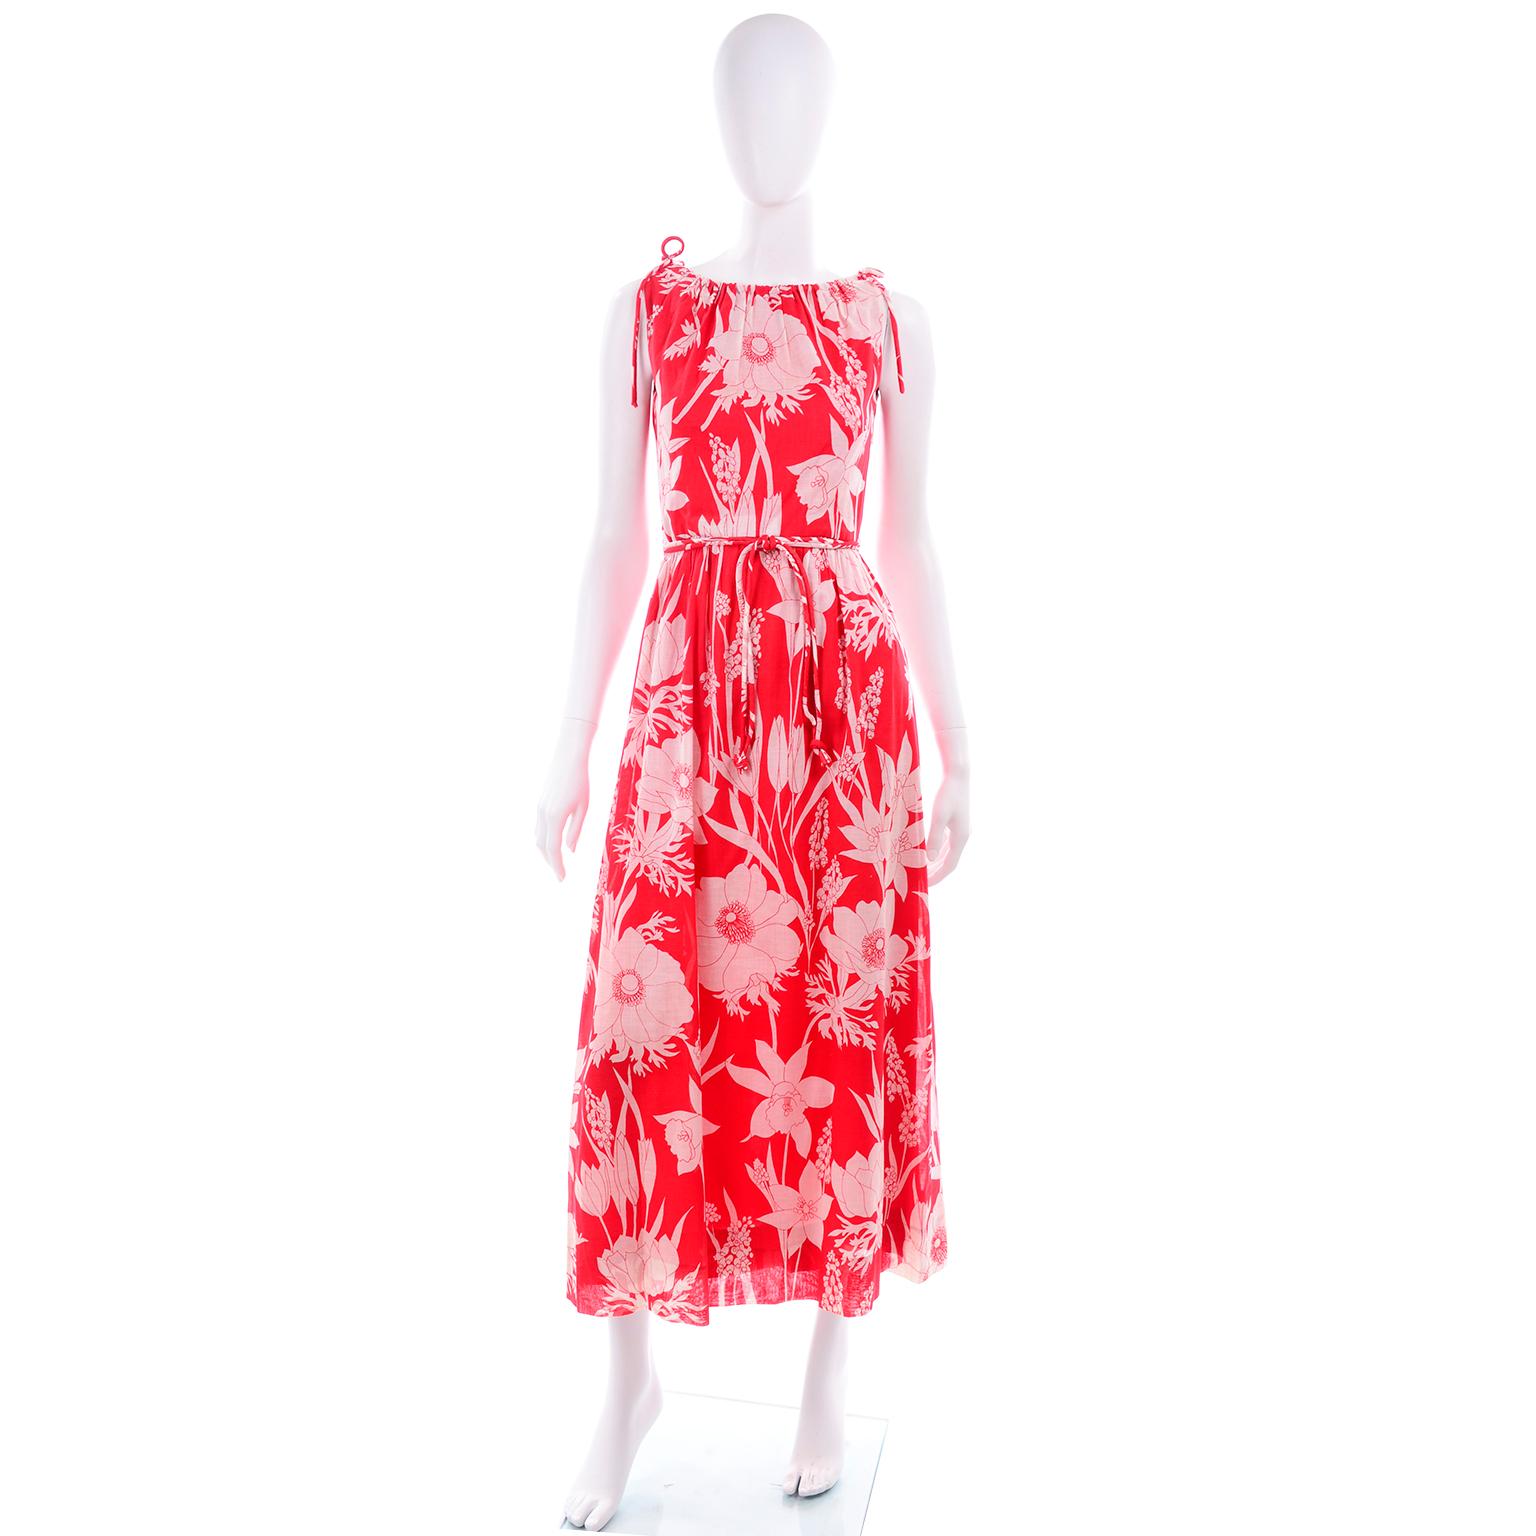 This bold red floral print vintage Adele Simpson sleeveless dress and cape ensemble was purchased at Harzfeld's Department Store in Kansas City in the 1970's. abel sewn in the bottom liner. This red and white floral printed cotton dress is lined in